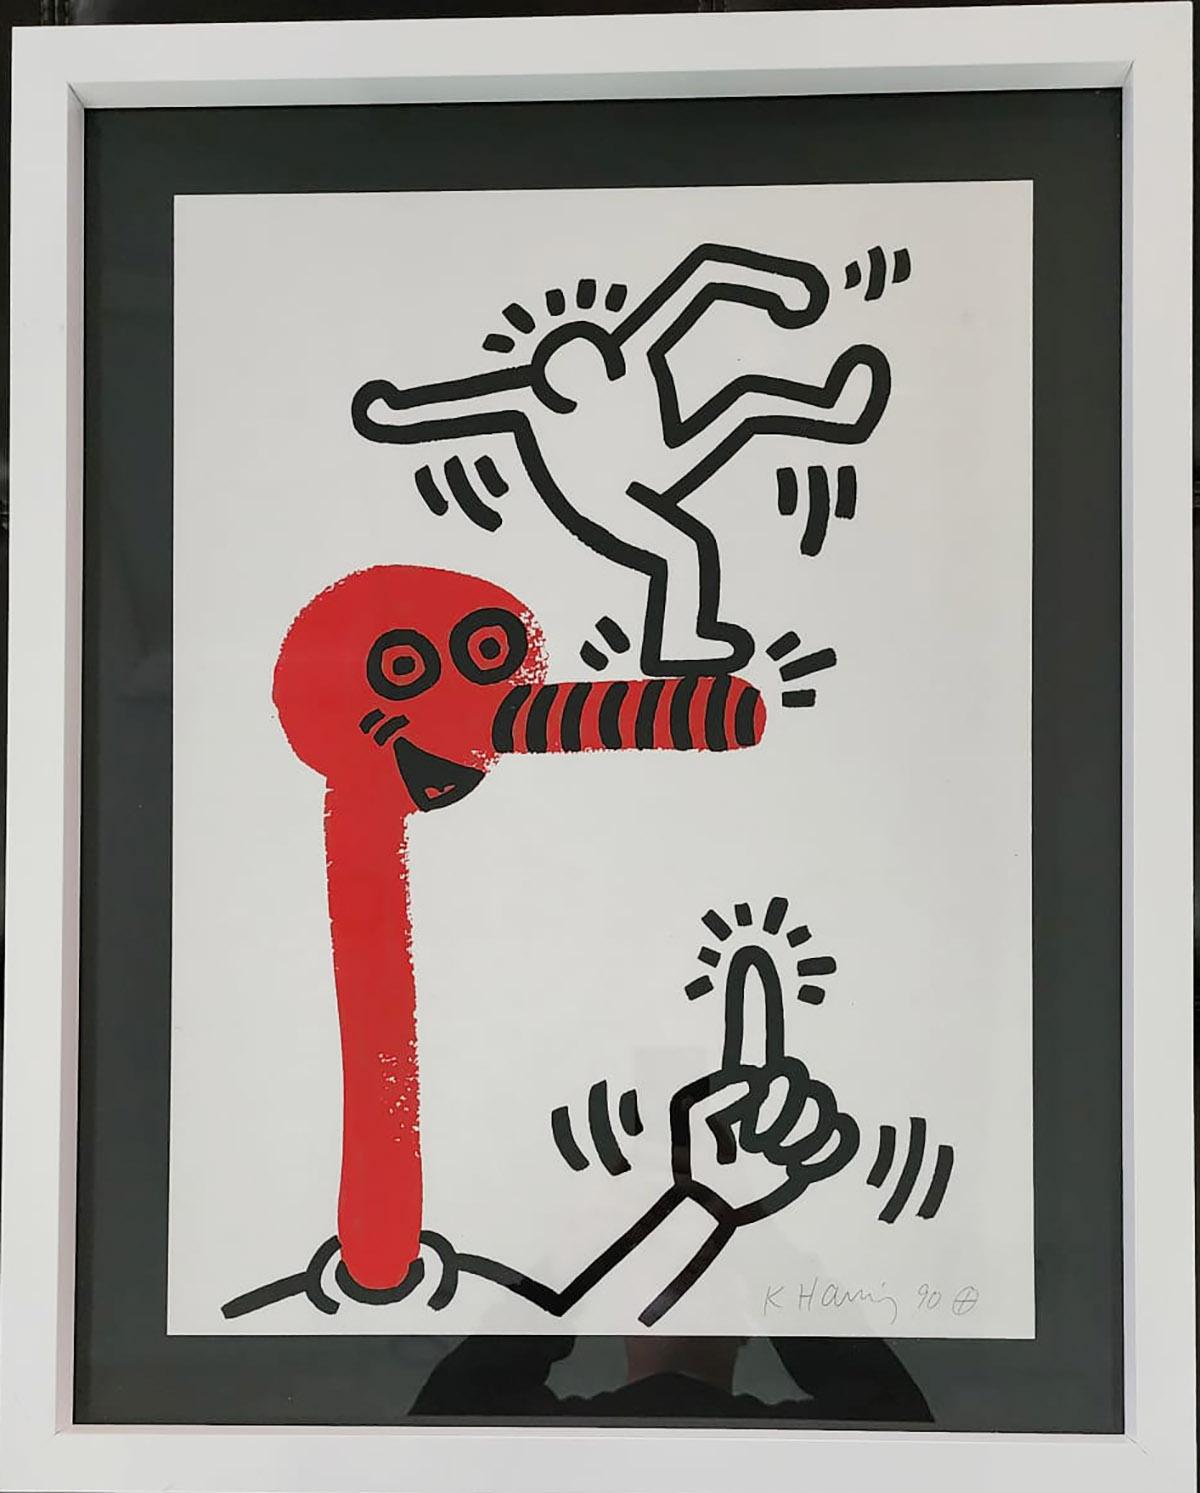 KEITH HARING 'THE STORY OF RED AND BLUE - 1', 1989, SIGNED & NUMBERED - Print by Keith Haring